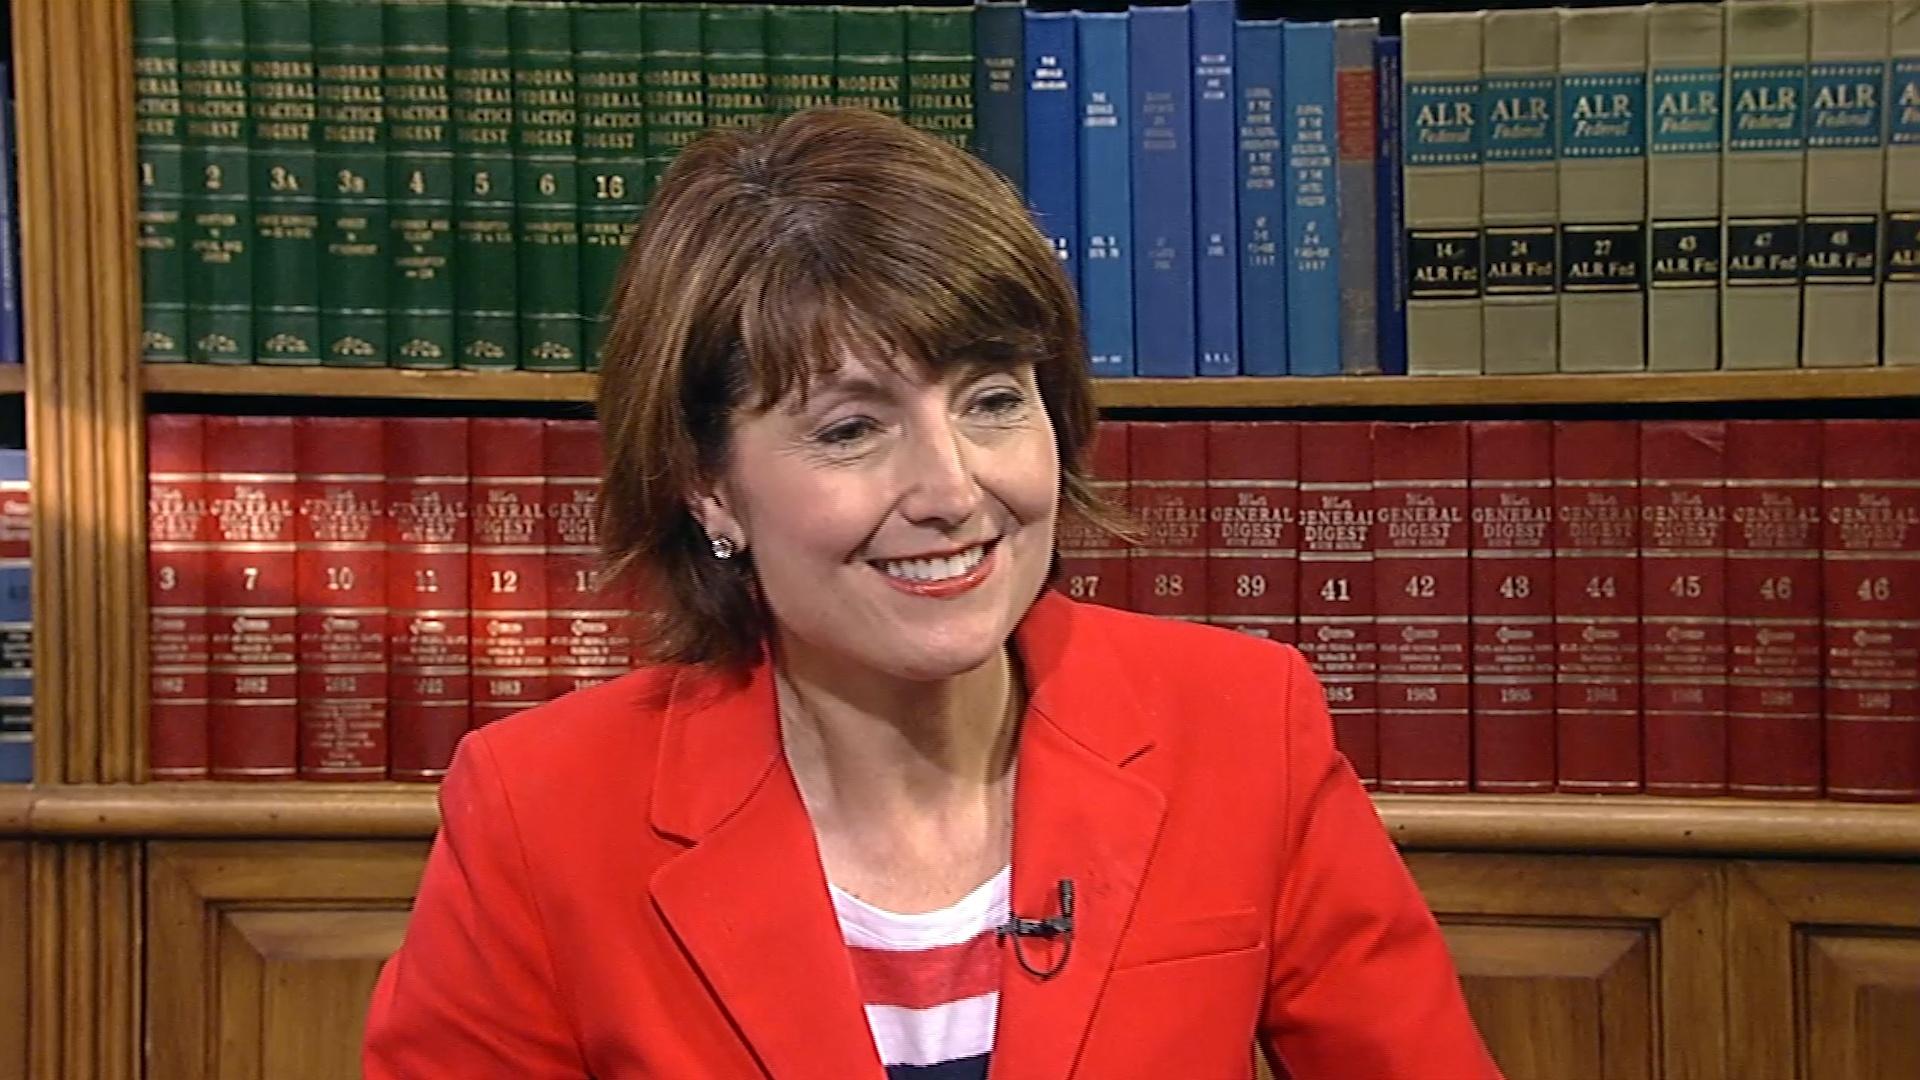 Women Thought Leaders: Rep. Cathy McMorris Rodgers